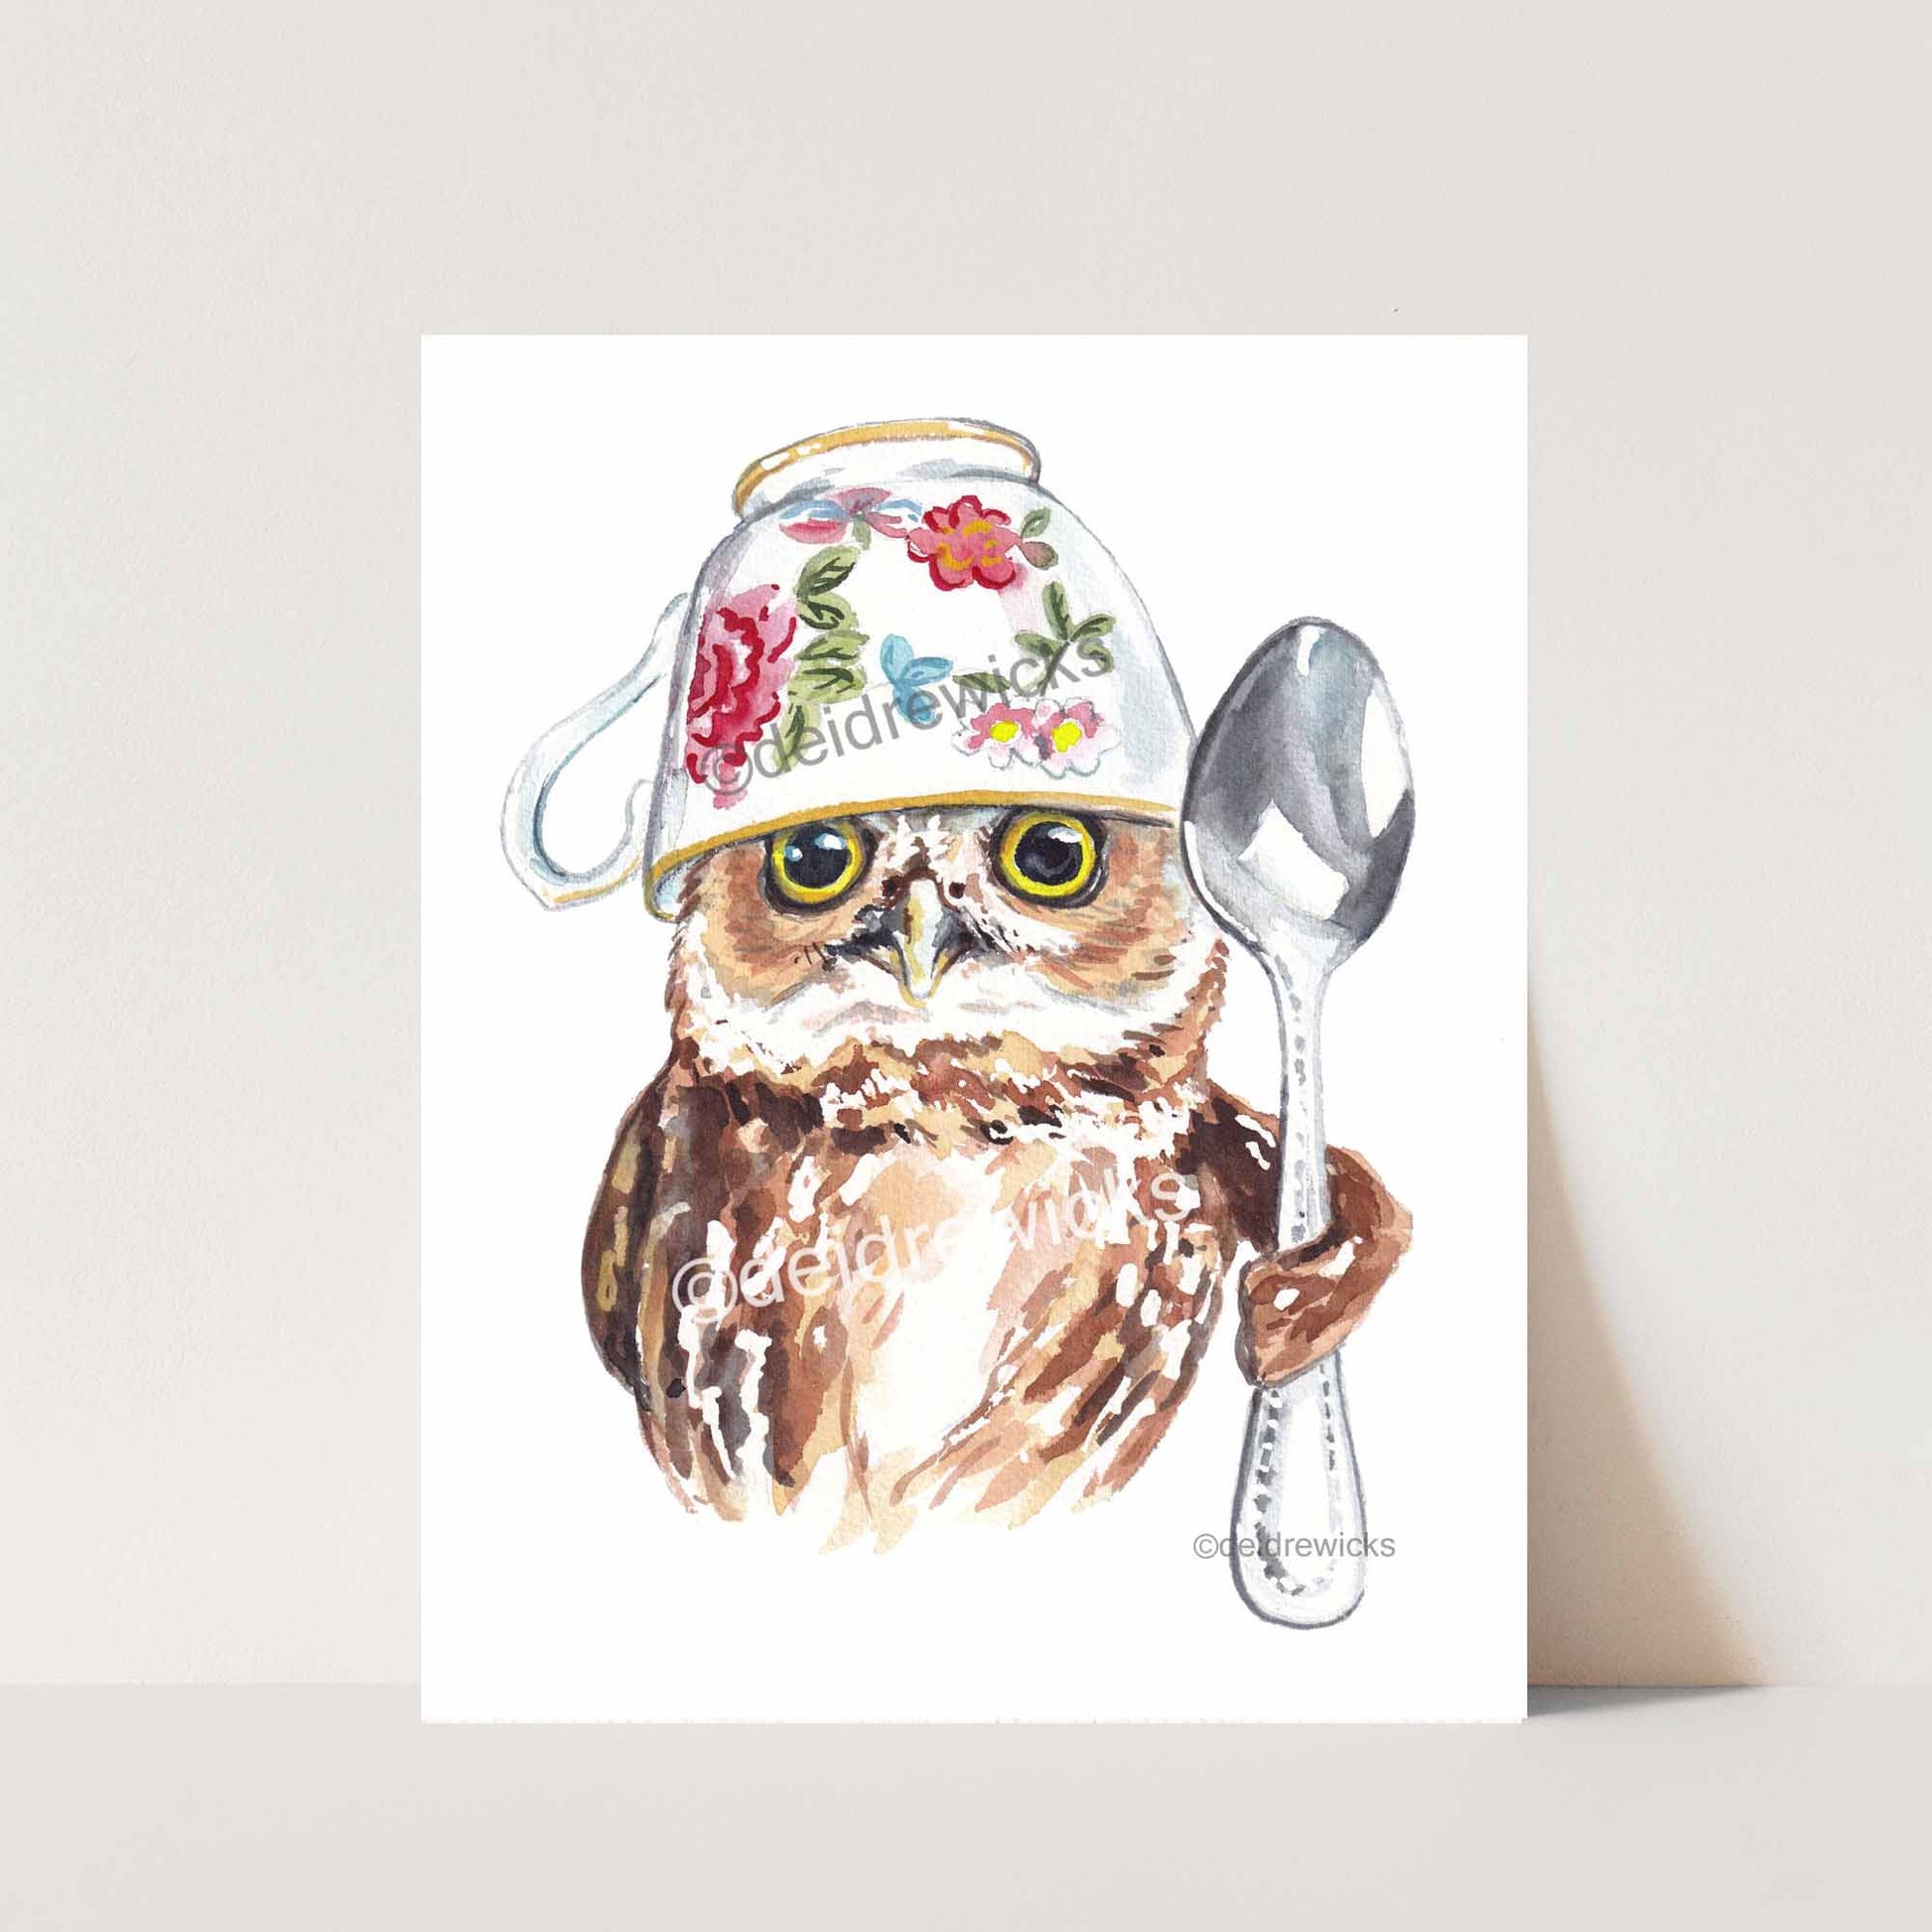 Northern Saw Whet owl with a tea cup and spoon, watercolor painting by Deidre Wicks